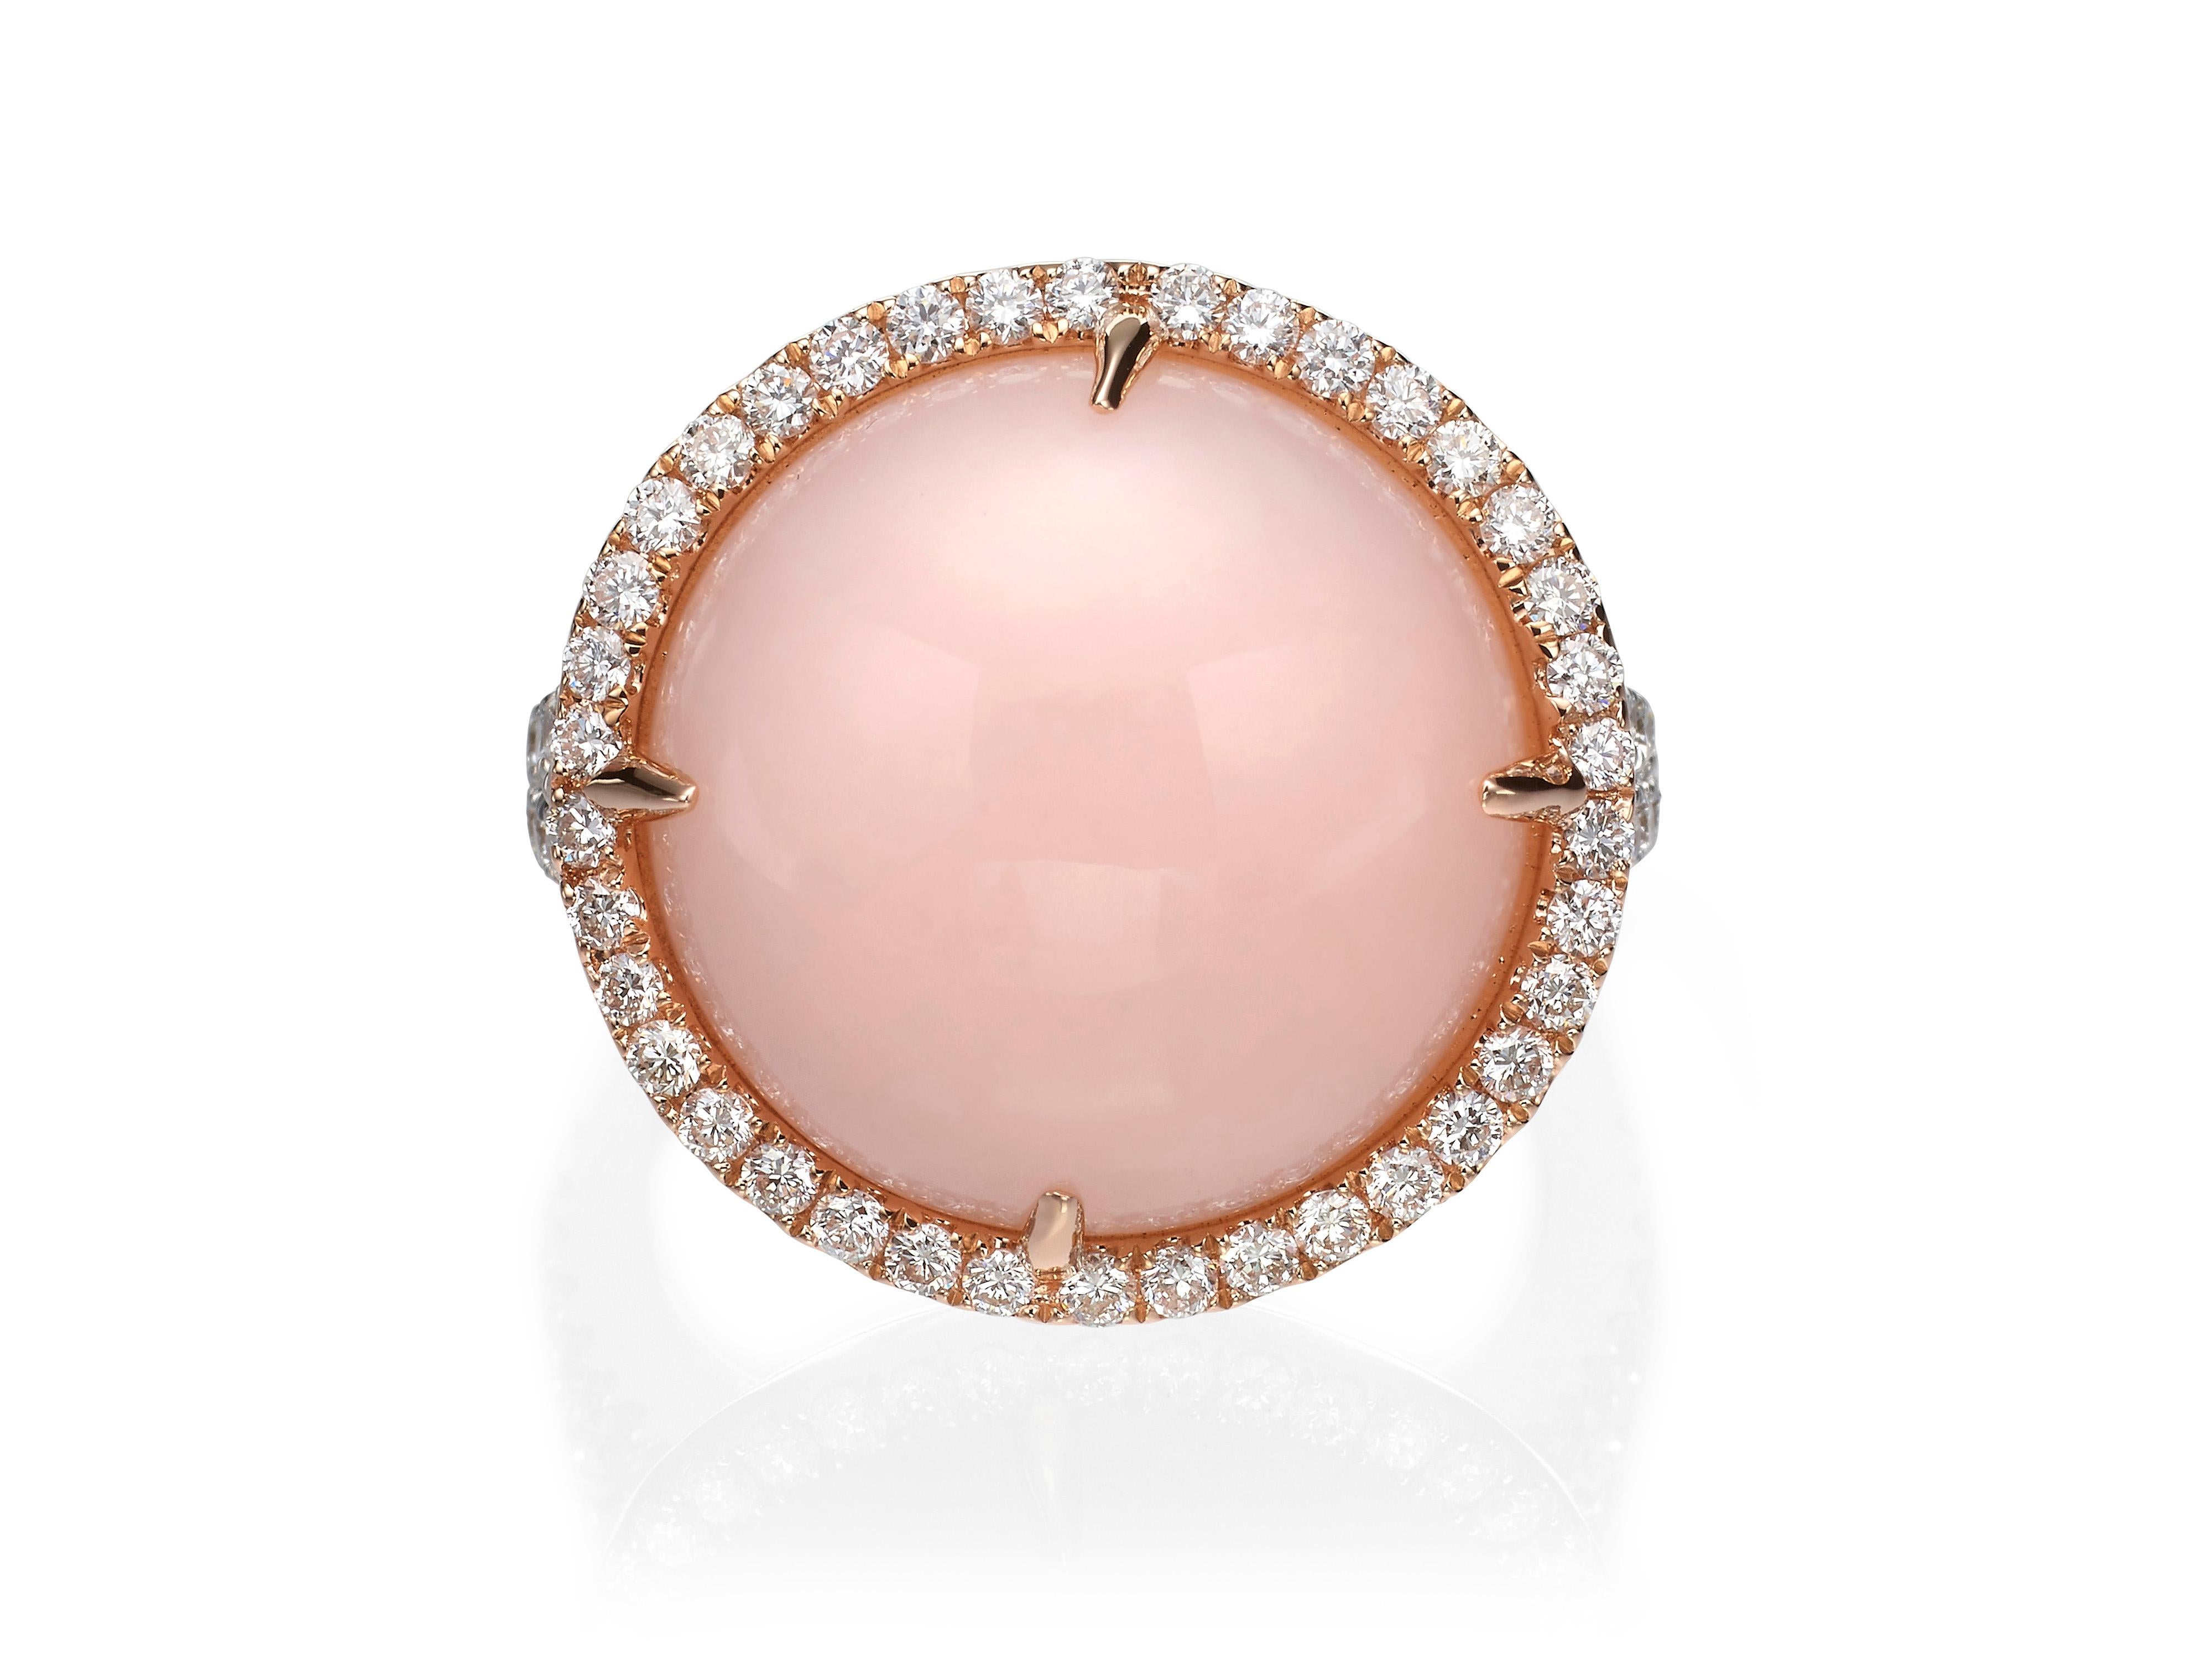 Contemporary 15.03 Carat Pink Opal and Diamond 18 Karat Rose and White Gold Cocktail Ring